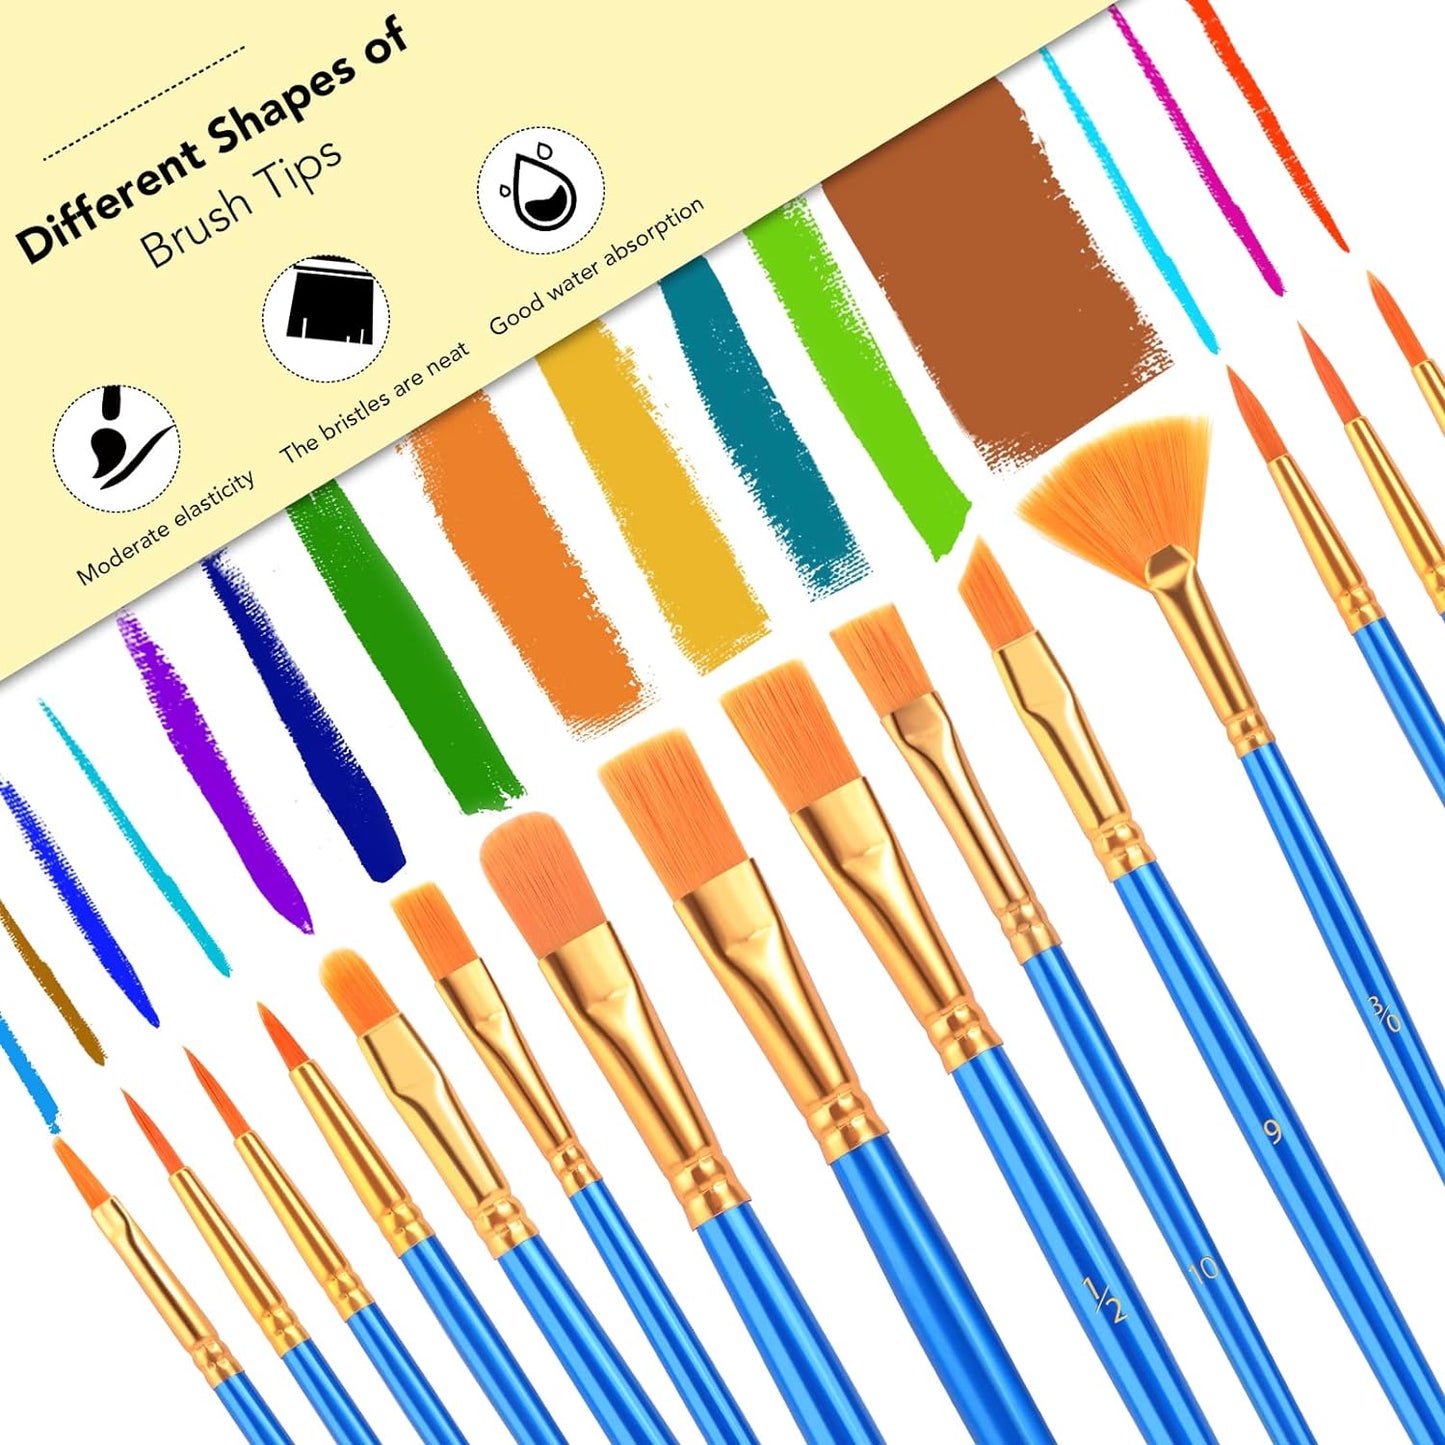 Acrylic Paint Brush Set, 15 Pcs Nylon Hair Paint Brushes for All Purpose Oil Watercolor Face Body Rock Painting Artist, Small Paint Brush Kits for Kids Adult Drawing